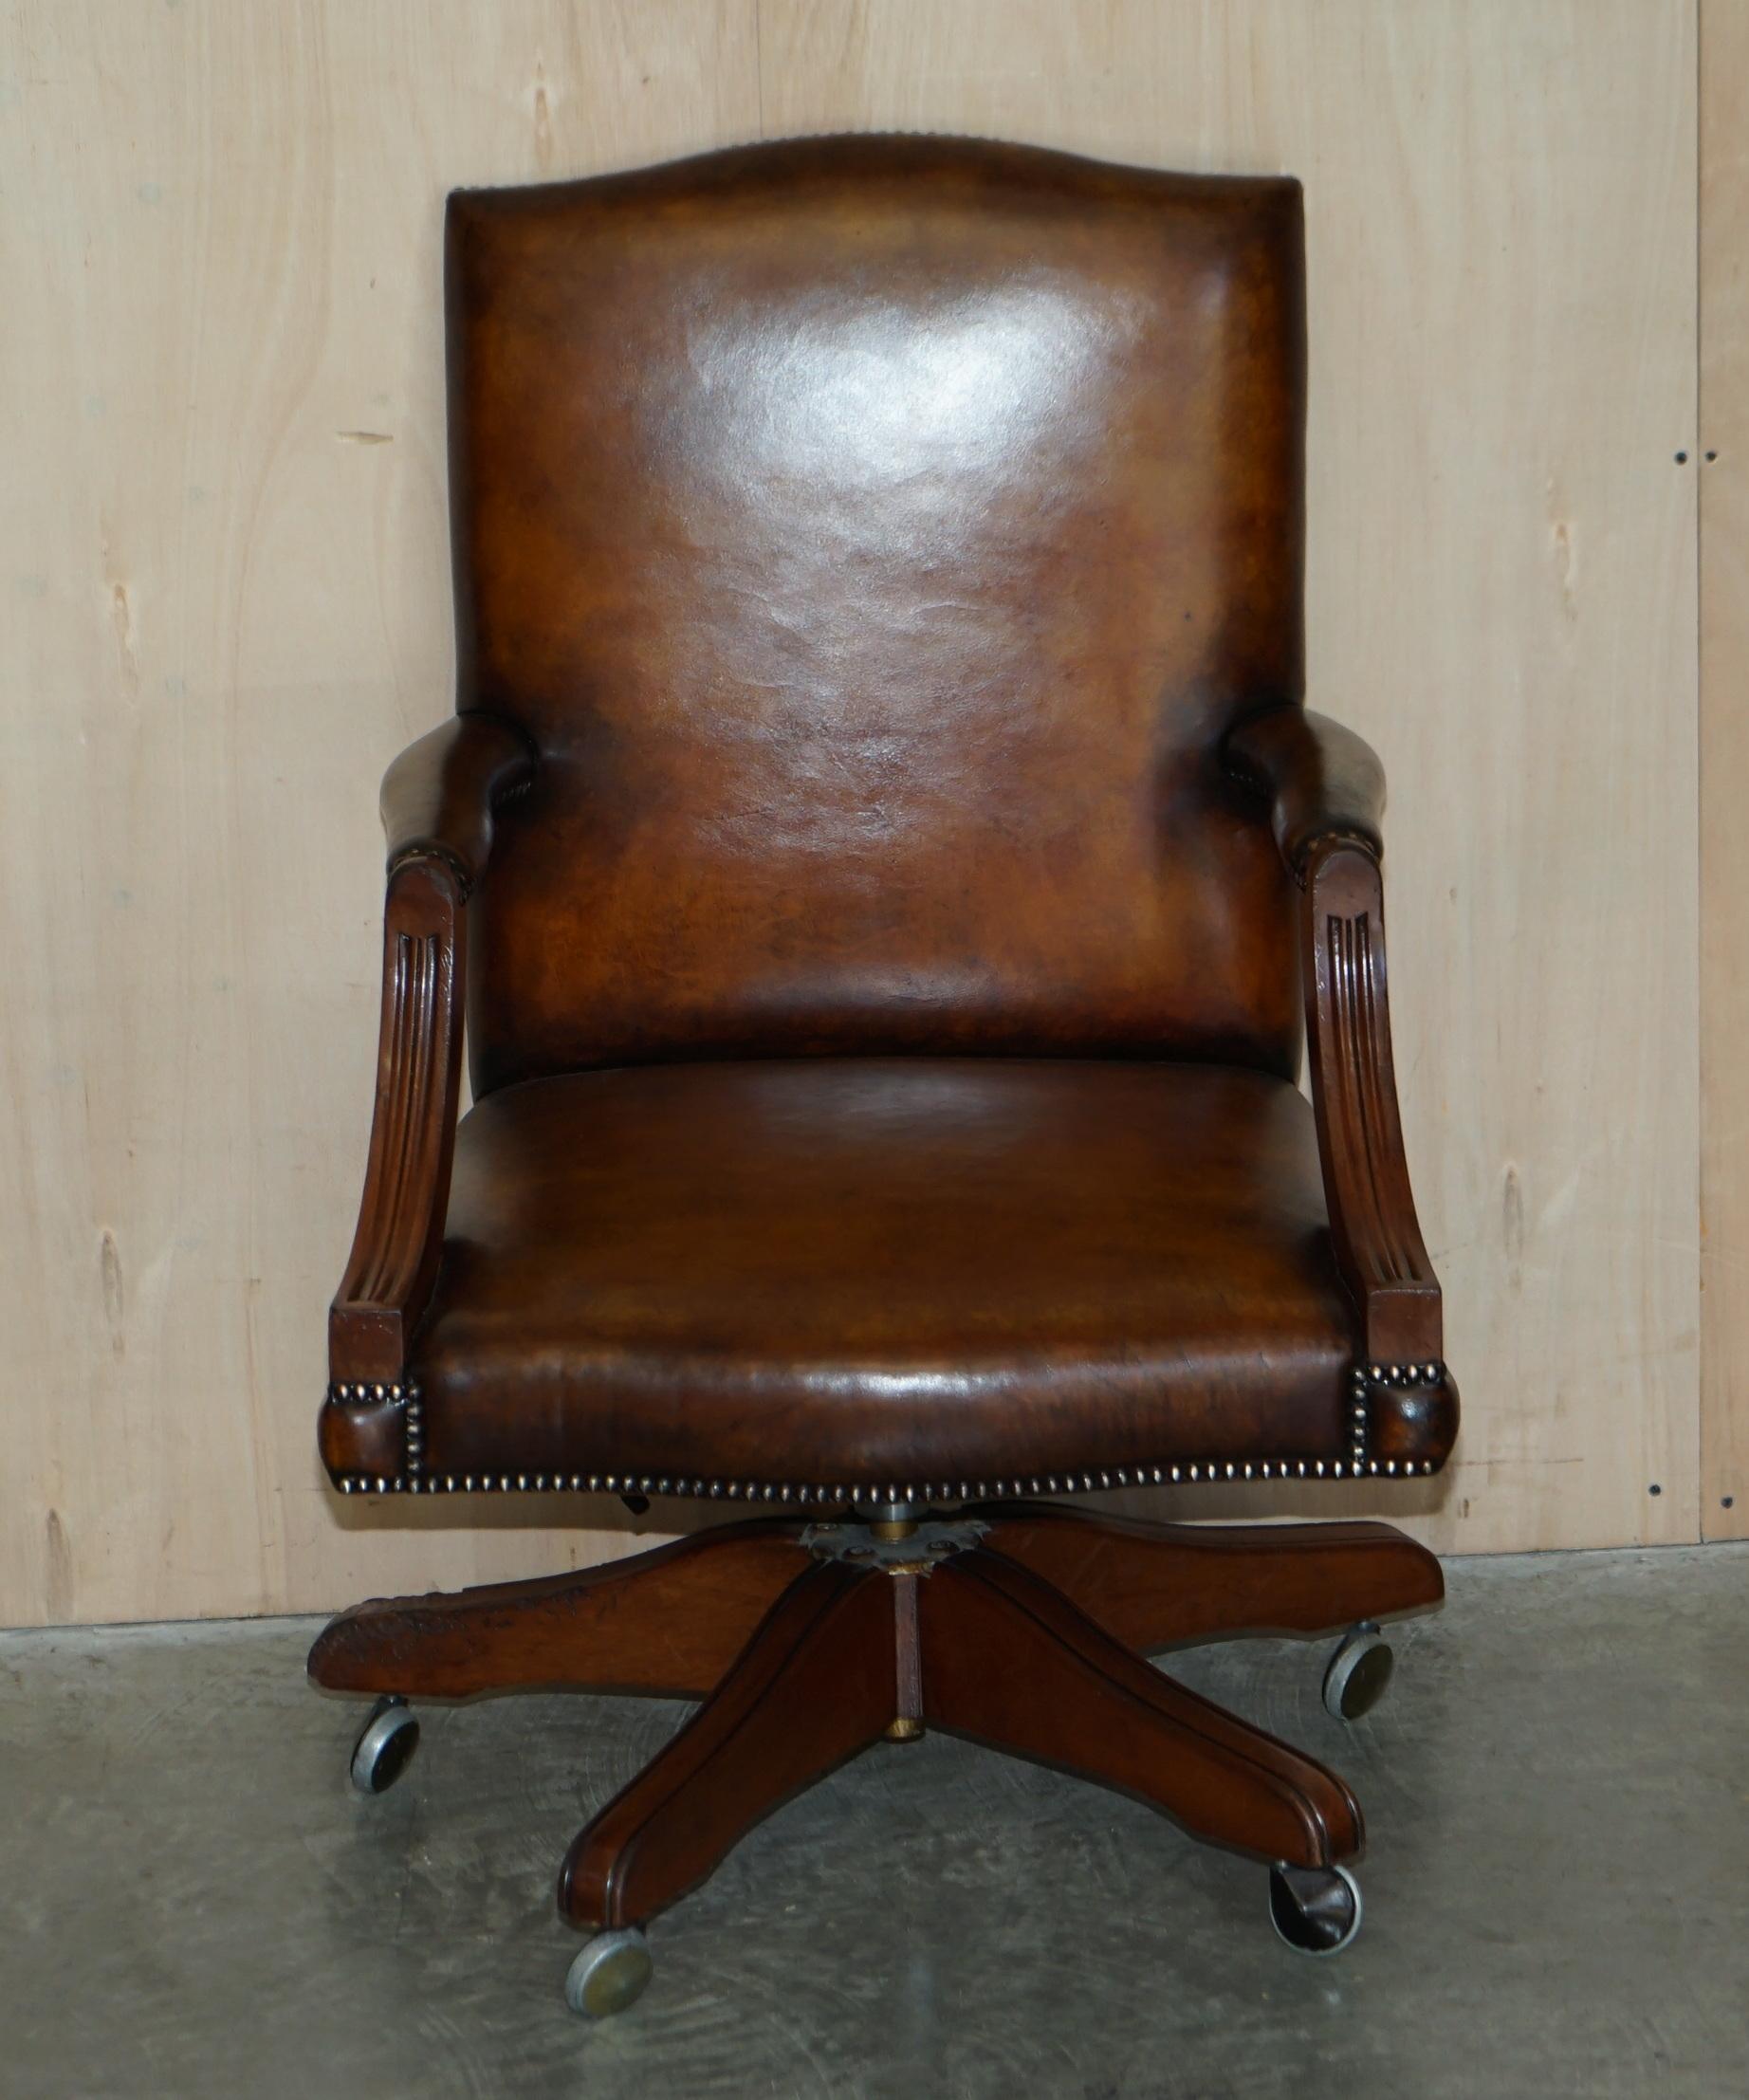 We are delighted to offer for sale this lovely fully restored original oak framed vintage hand dyed cigar brown leather directors chair.

A very good looking well made and comfortable directors chair, I've not seen one with a solid oak frame like